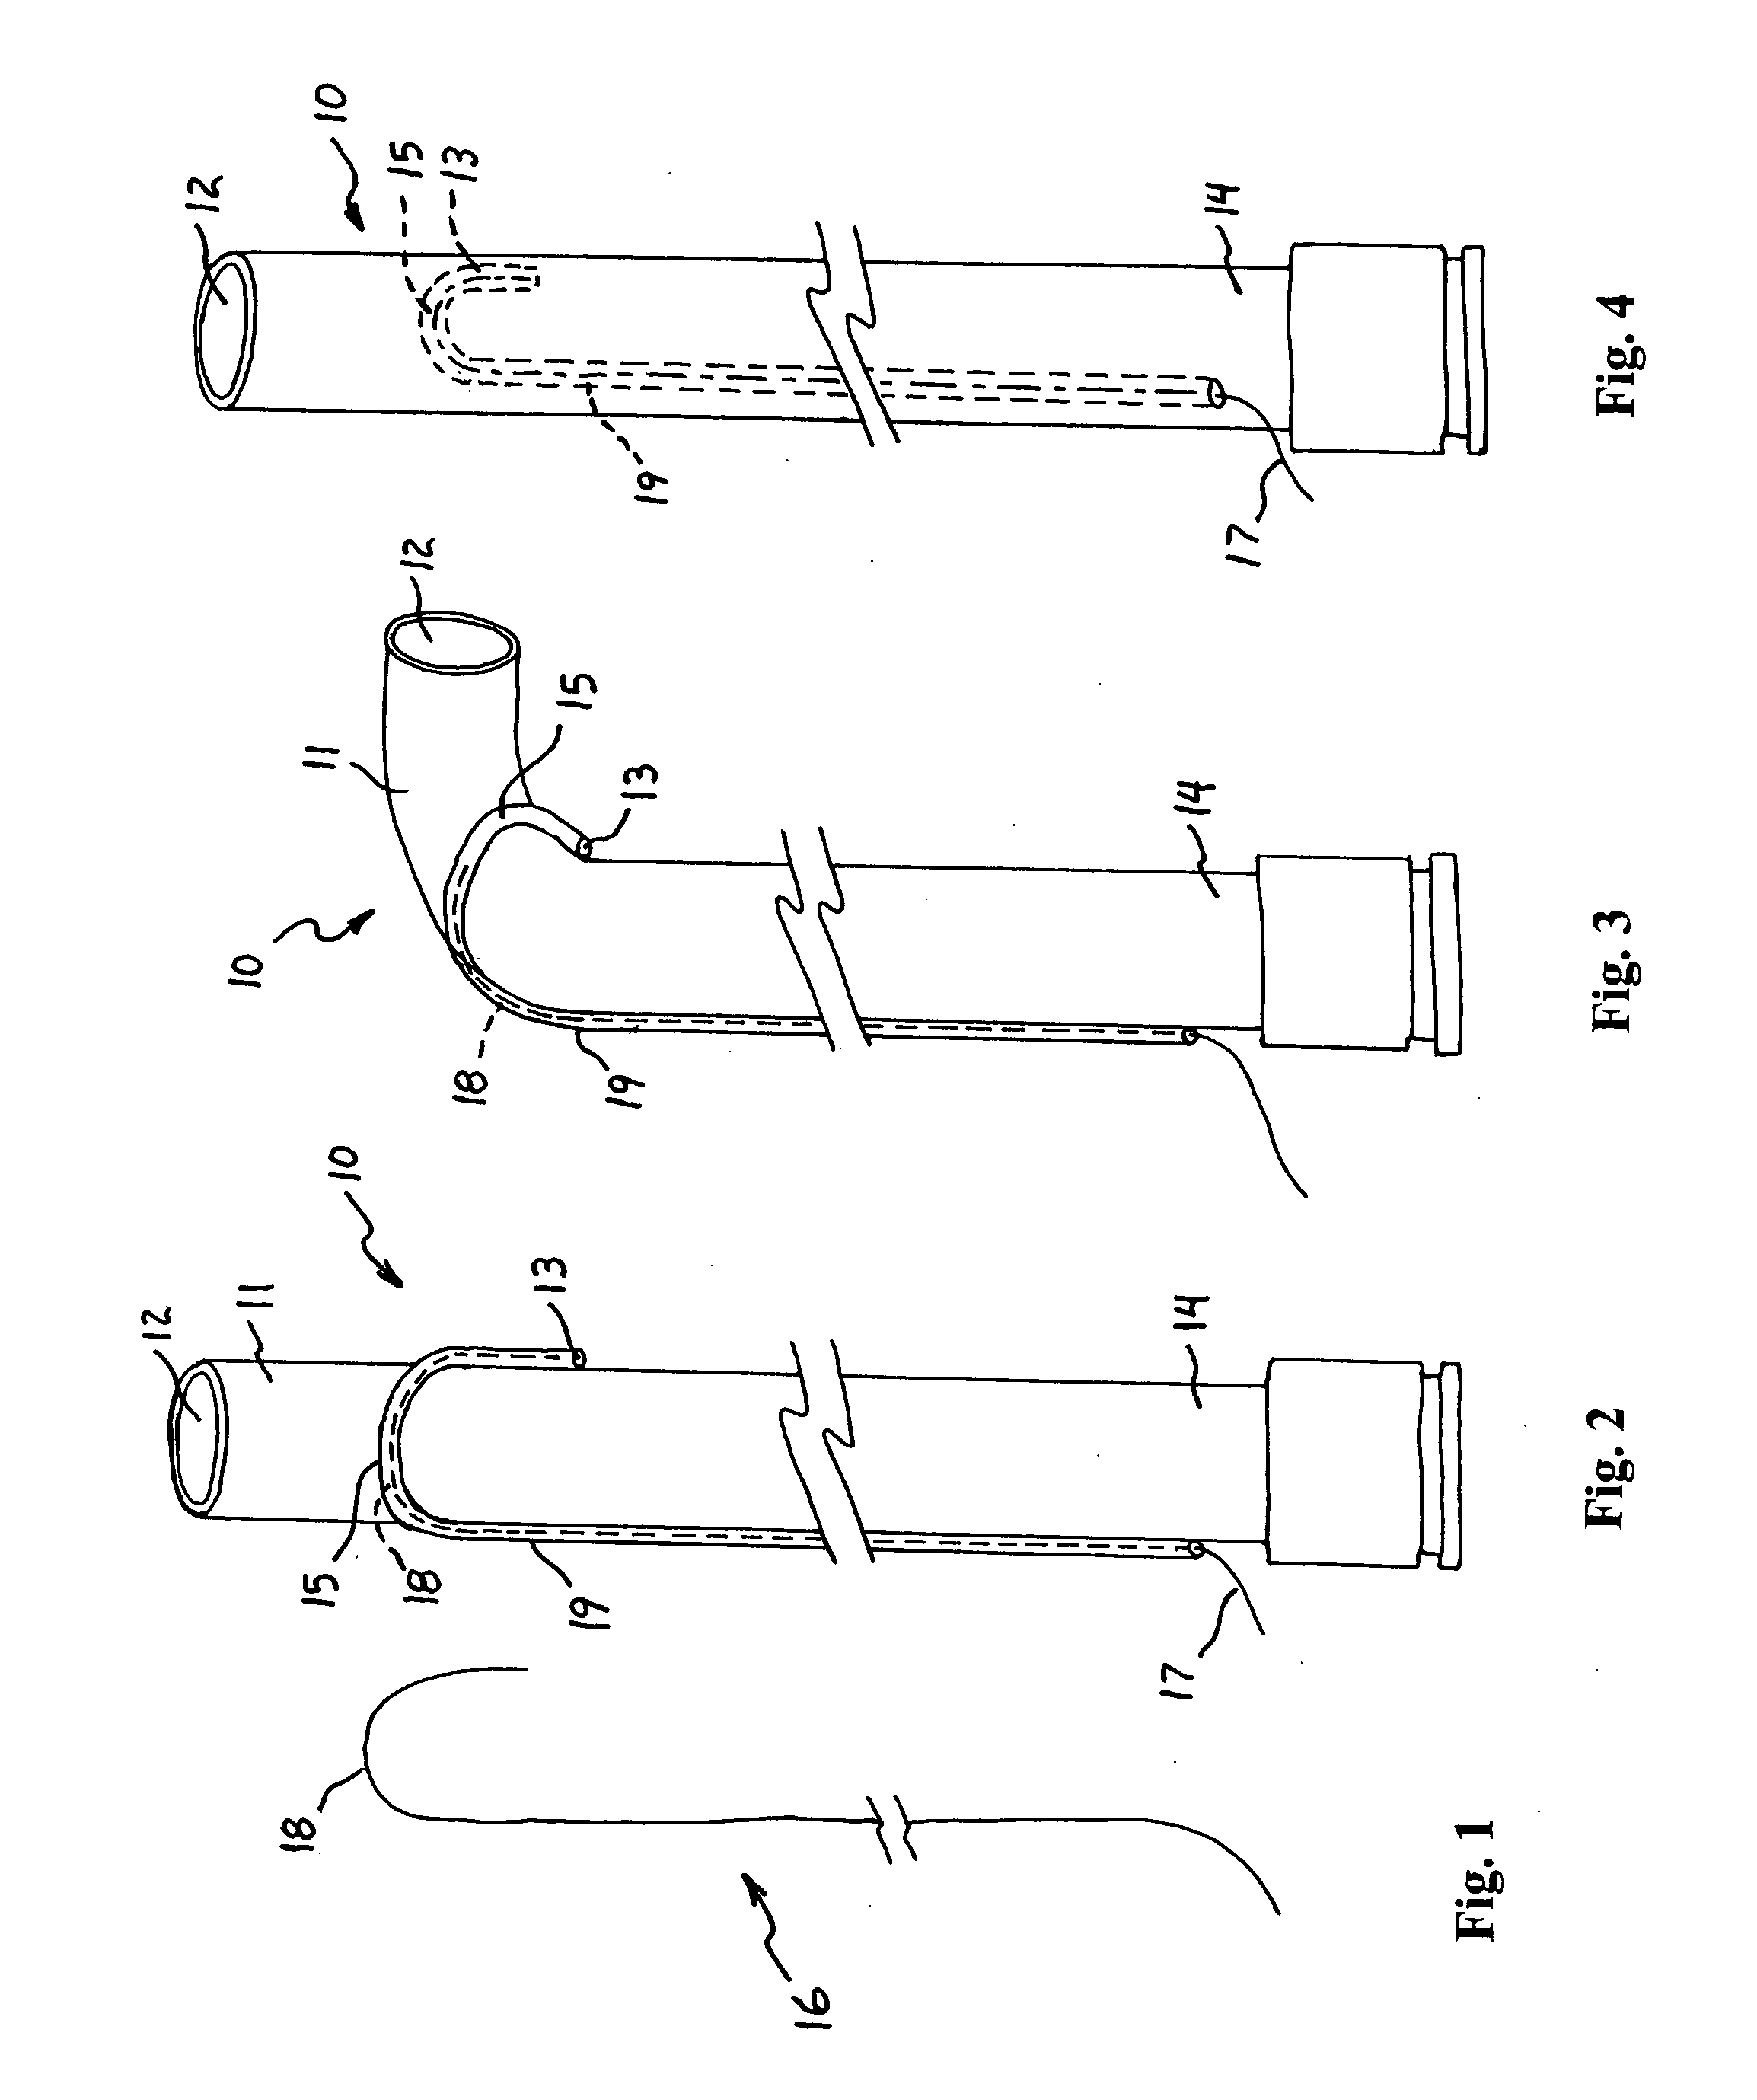 Method and apparatus for curving a catheter